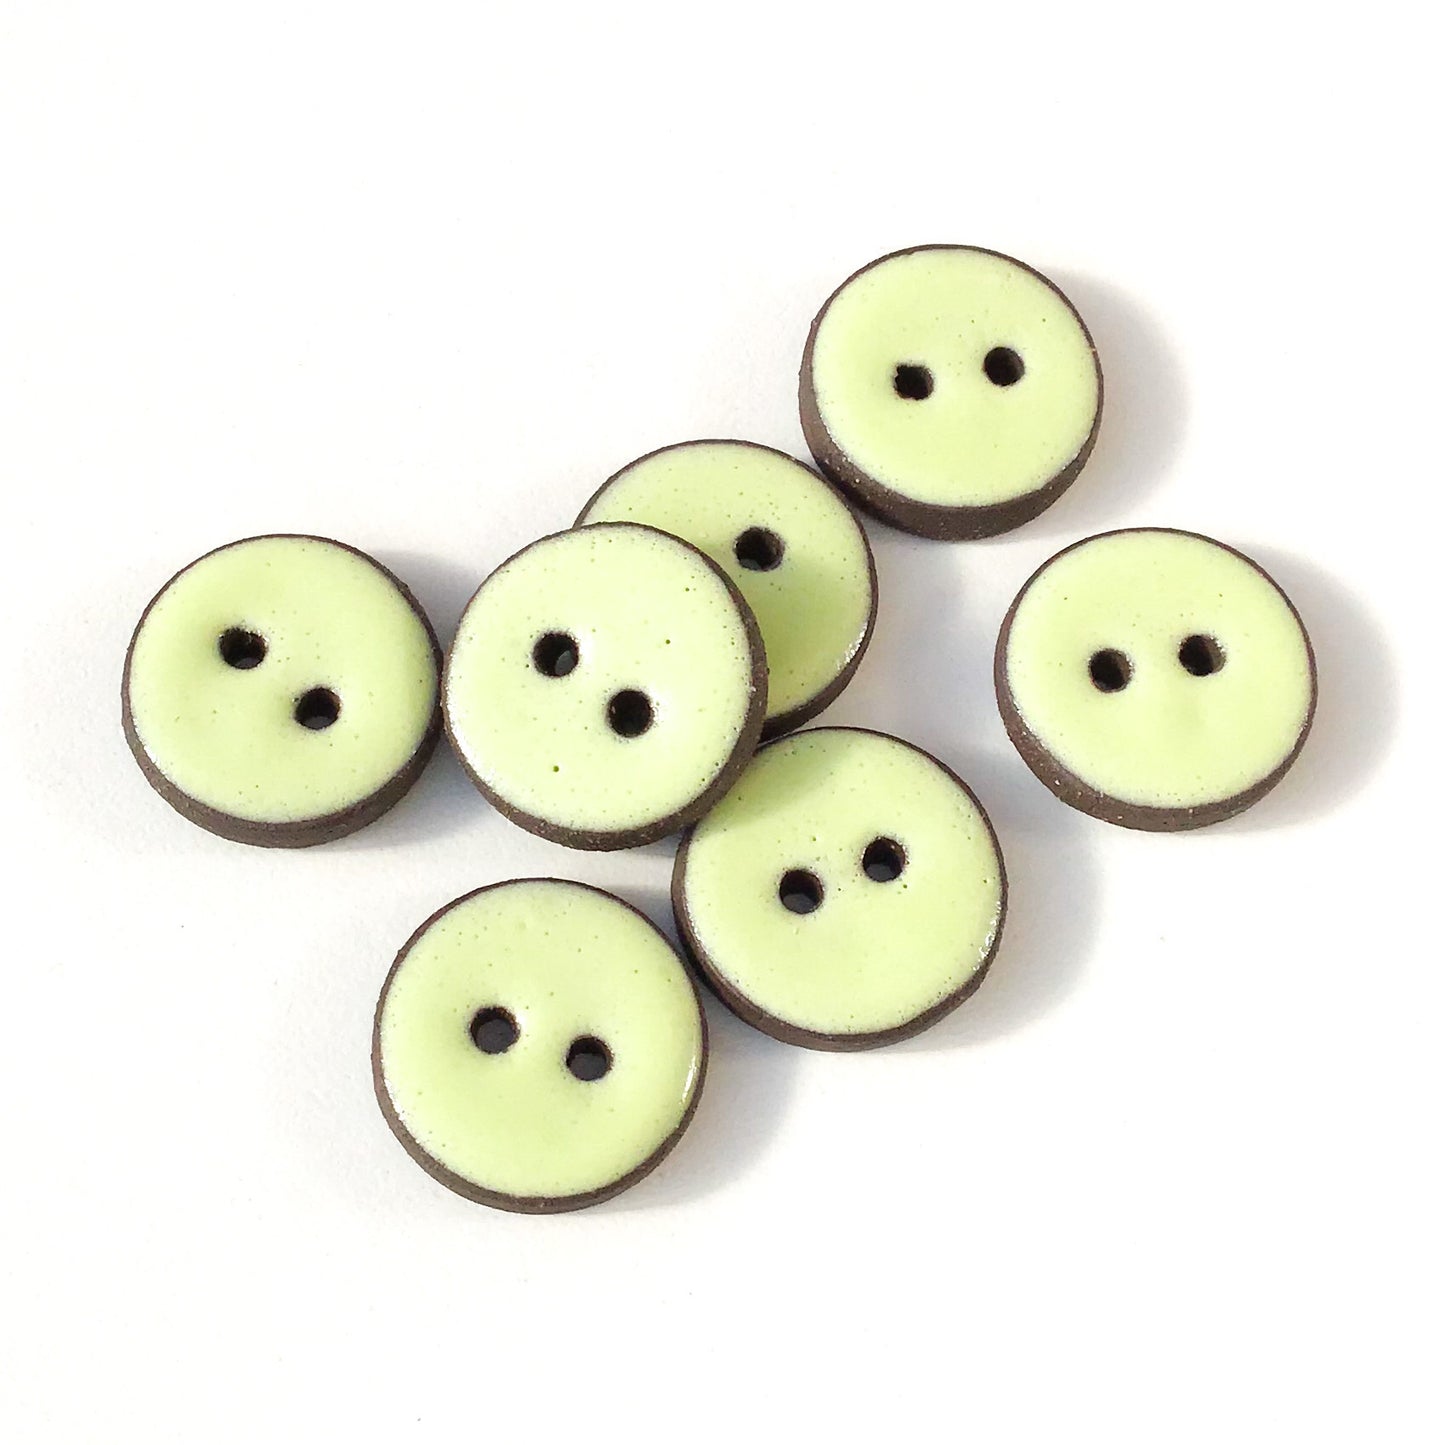 Pastel Green Ceramic Buttons - Light Green Clay Buttons - 3/4" - 7 Pack (ws-154)